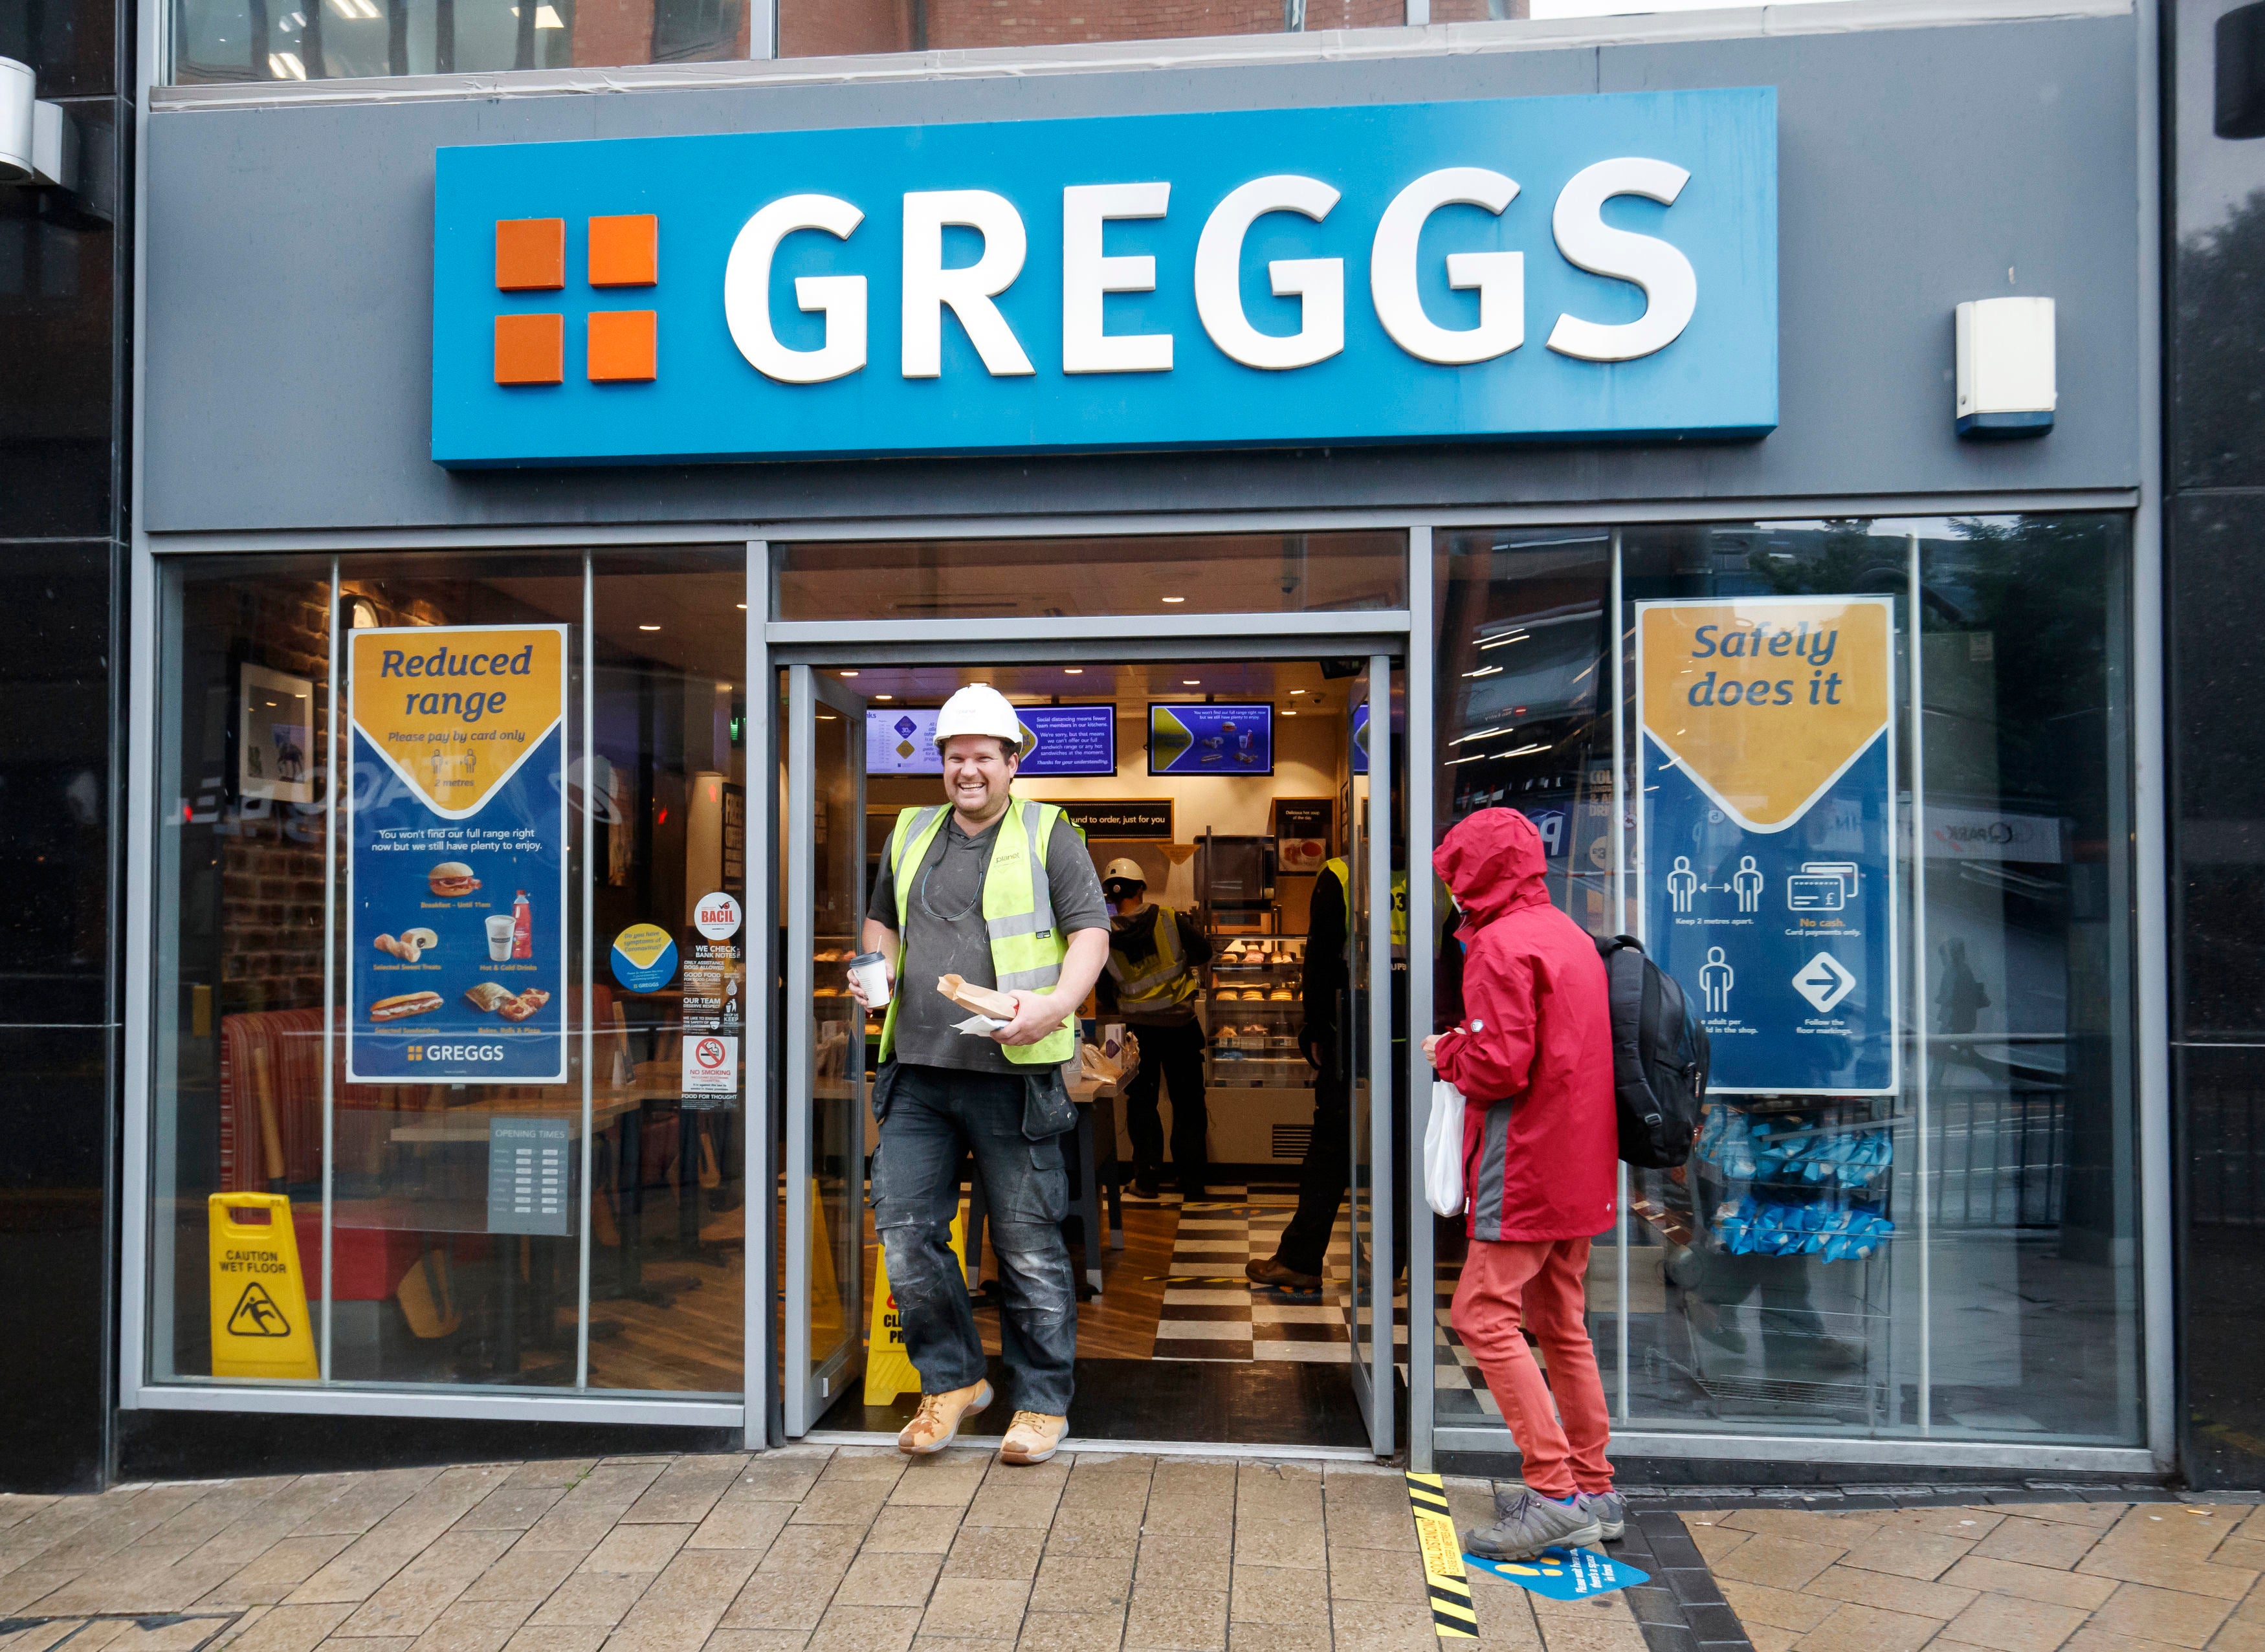 Greggs is still planning to open new outlets despite the pandemic